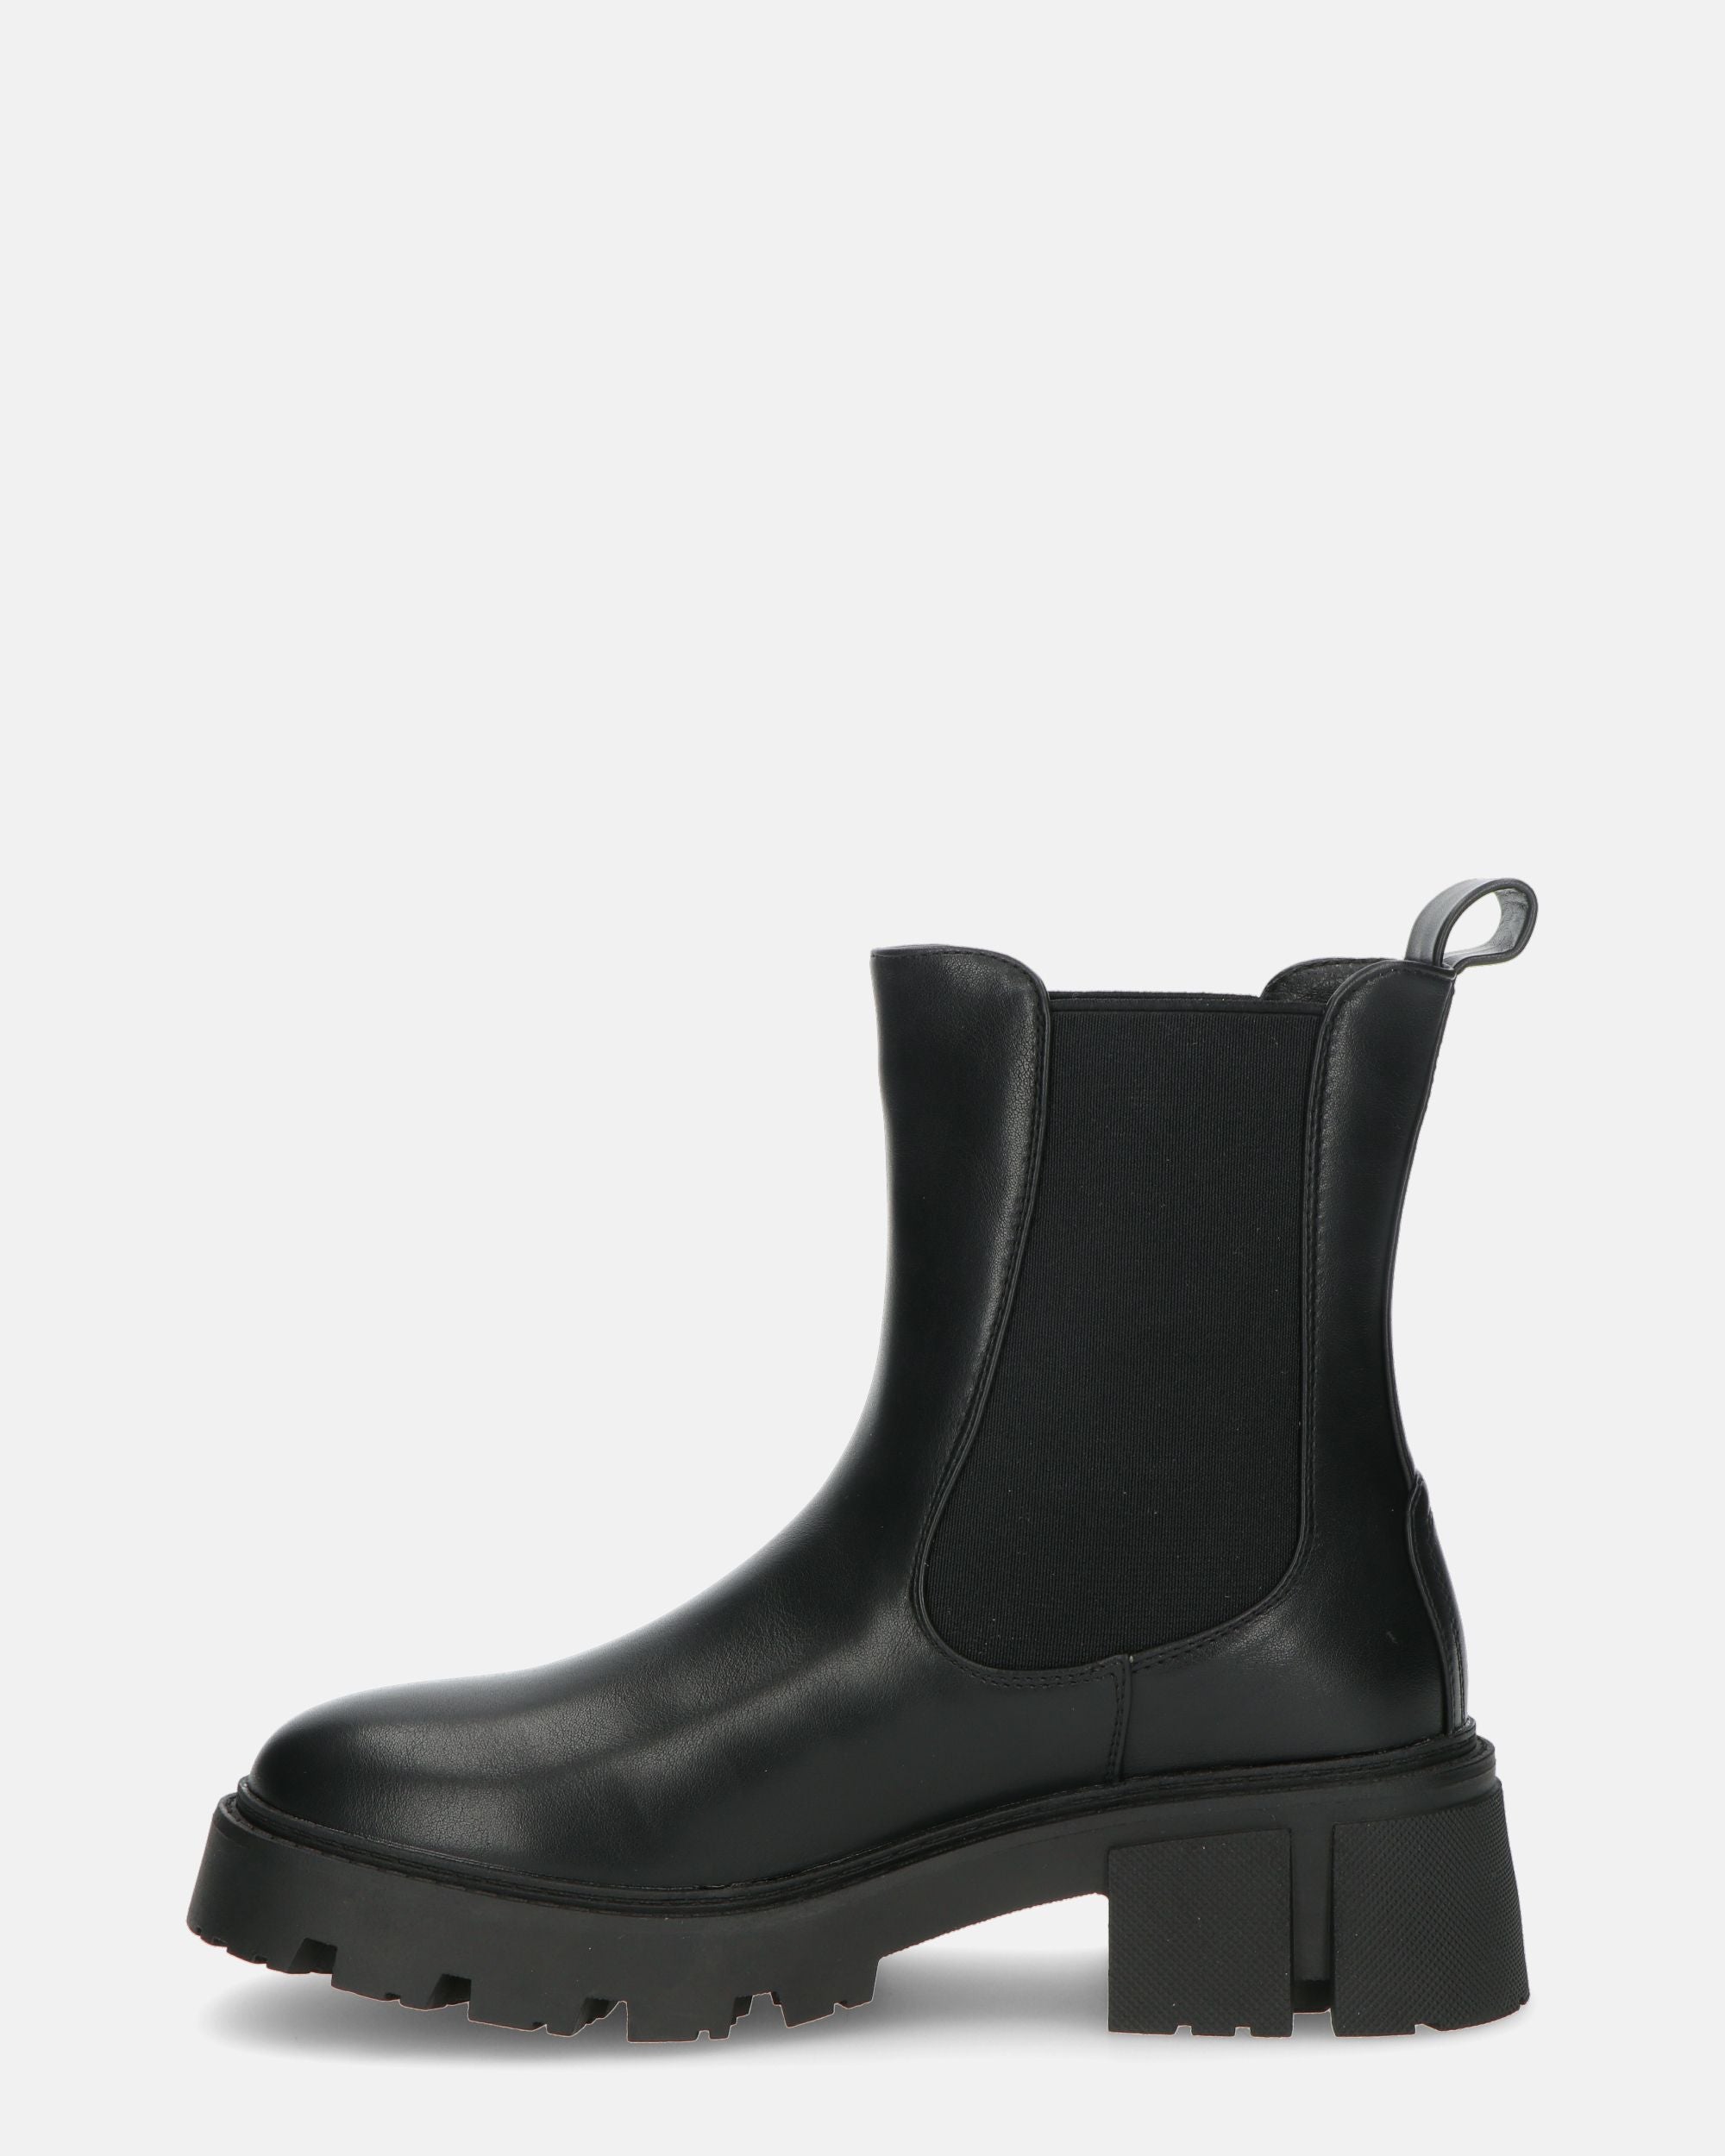 ALLEGRA - black ankle boots with elastic fabric